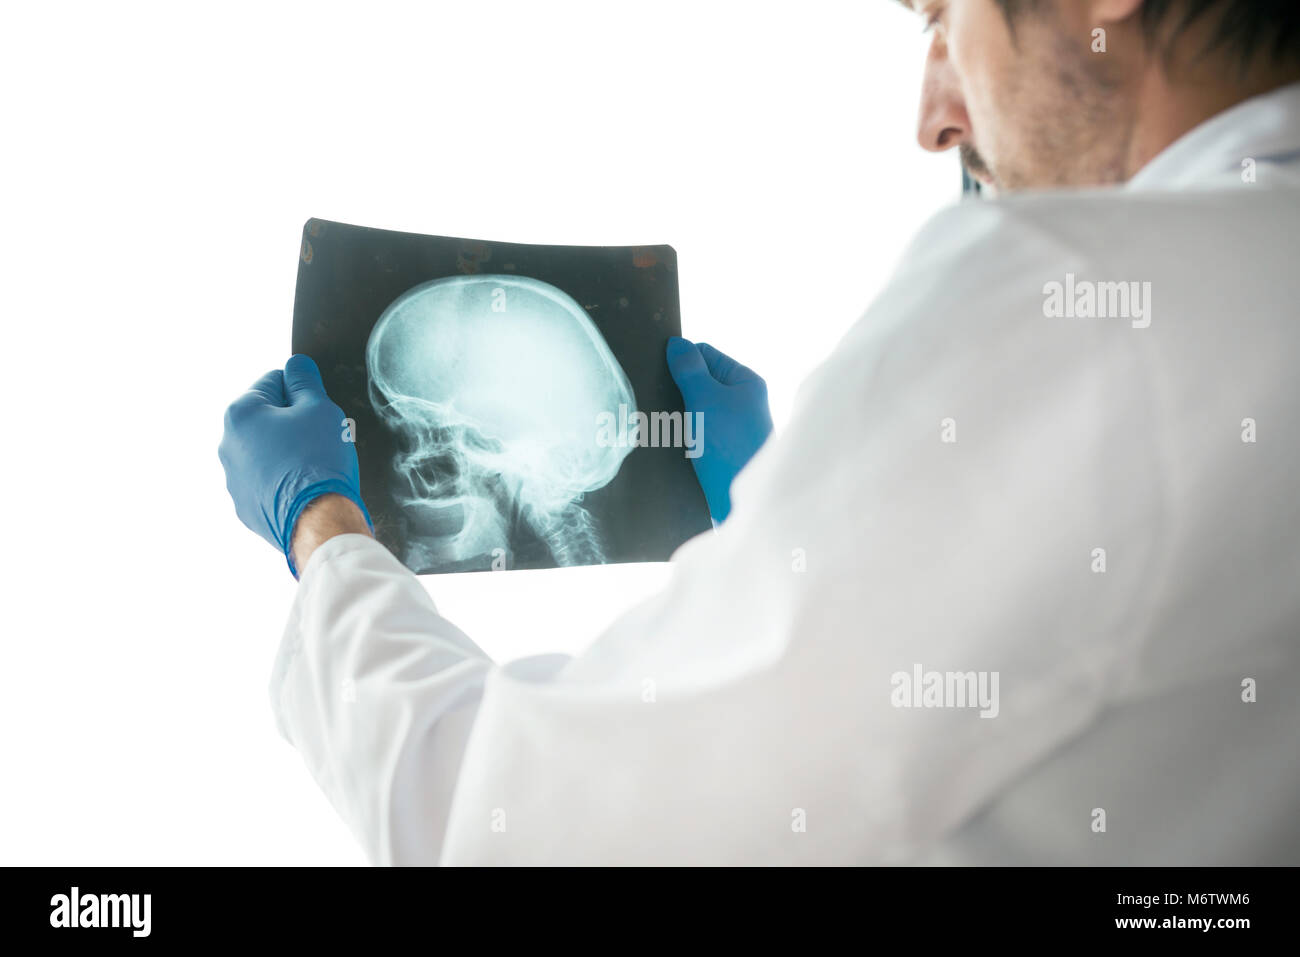 Doctor examining x-ray of the patient's skull in a medical clinic. Healthcare professional analyzing imaging test of human head. Stock Photo